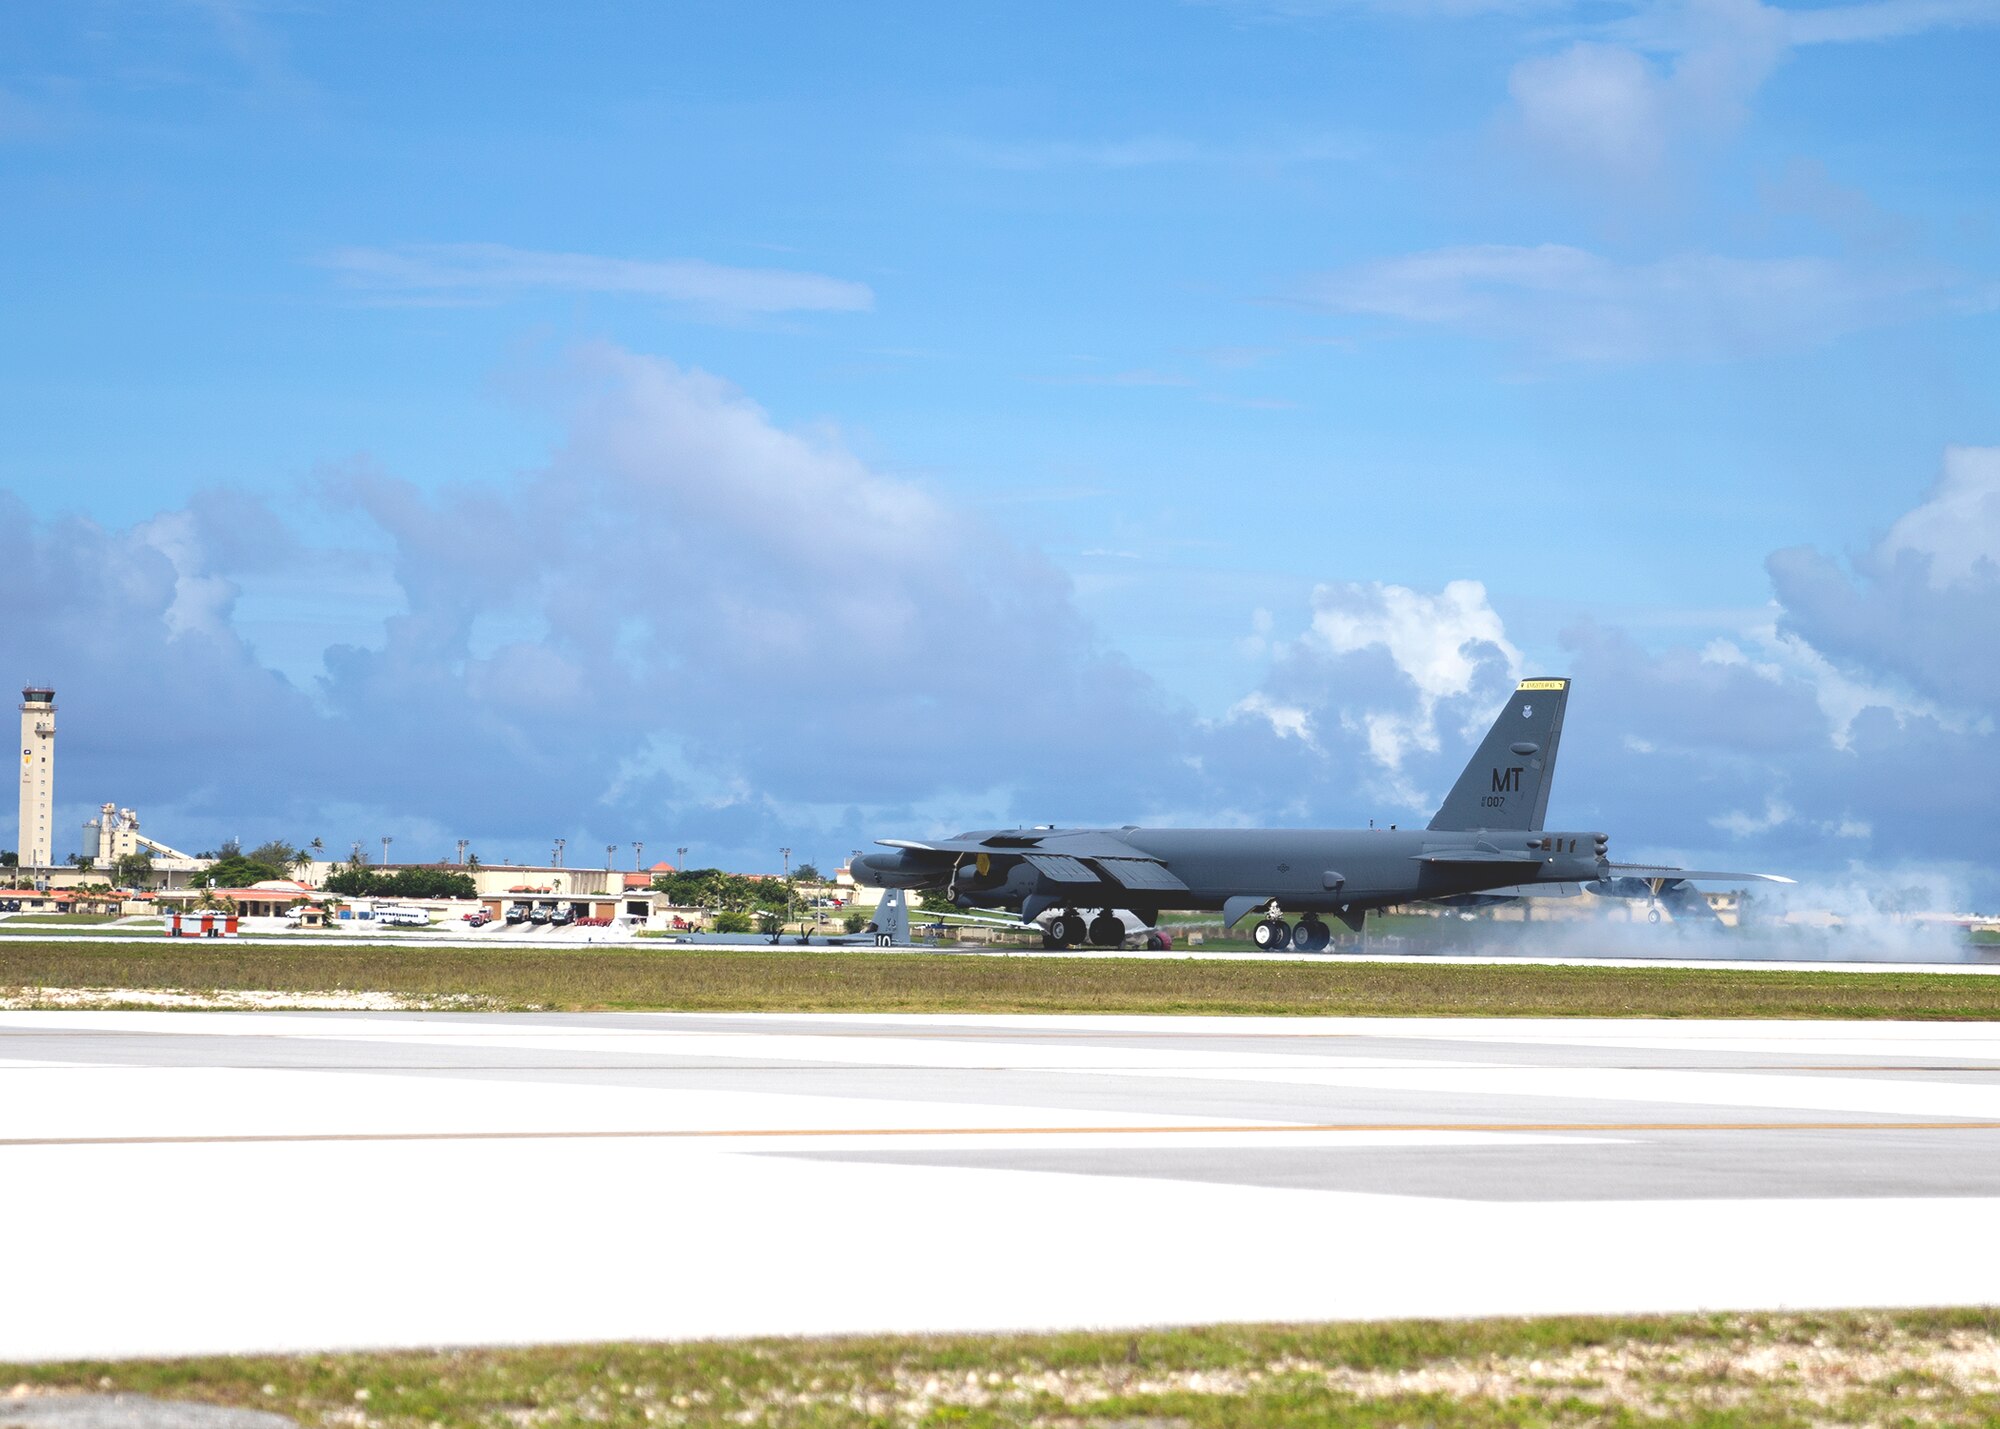 U.S. Air Force B-52H Stratofortress from the 5th Bomb Wing, Minot Air Force Base North Dakota, lands at Andersen Air Force Base, Guam, for a Bomber Task Force deployment, July 15, 2021. Bomber Task Force missions demonstrate the strategic credibility and tactical flexibility of U.S. forces in today’s security environment across the globe. (U.S. Air Force photo by Staff Sgt. Kevin Iinuma)